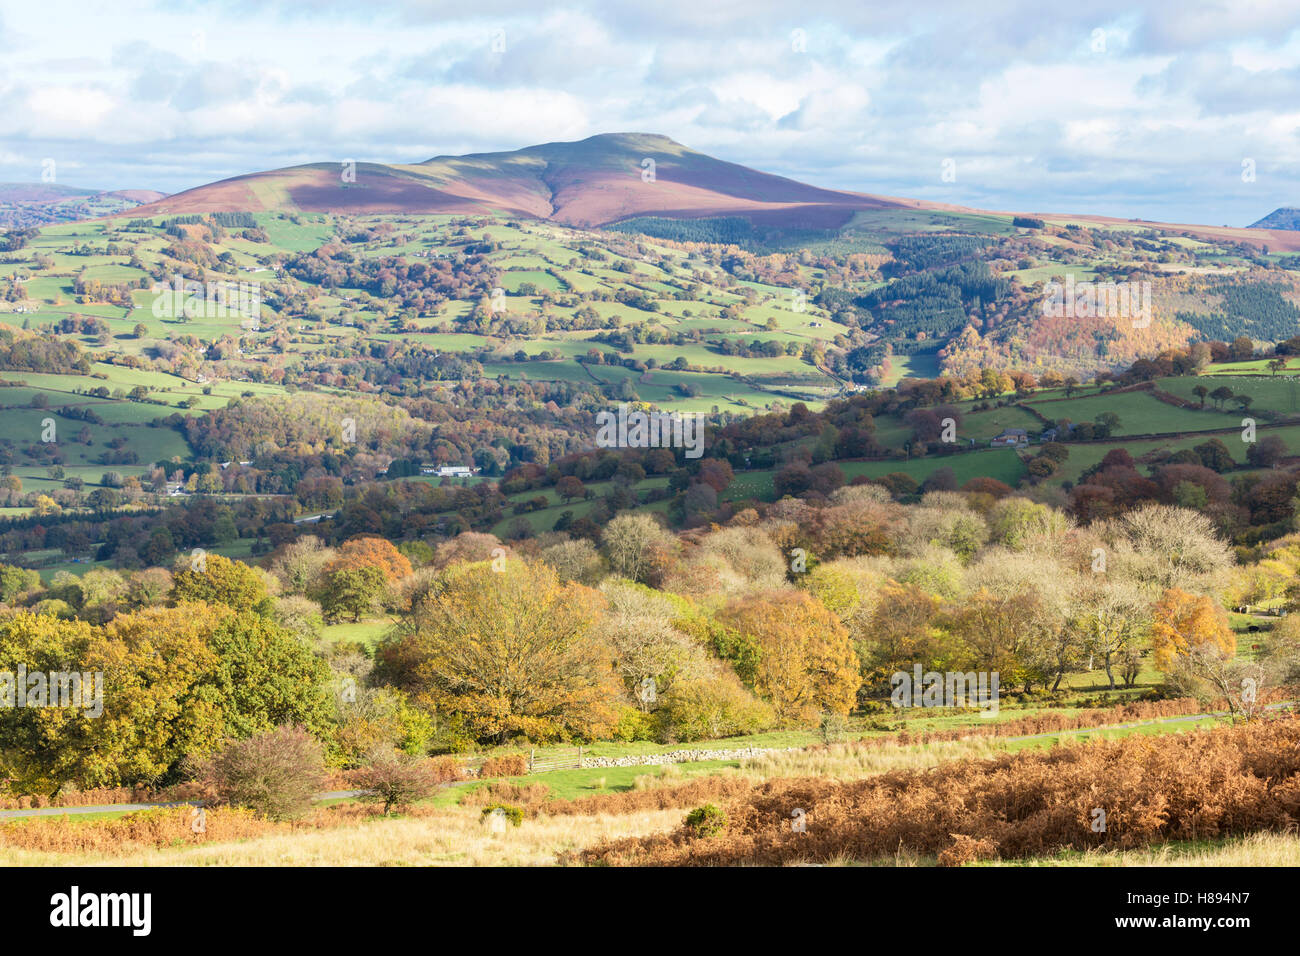 Autumn over Sugar Loaf mountain in the Usk Valley, Brecon Beacons National Park Monmouthshire, South Wales, UK Stock Photo